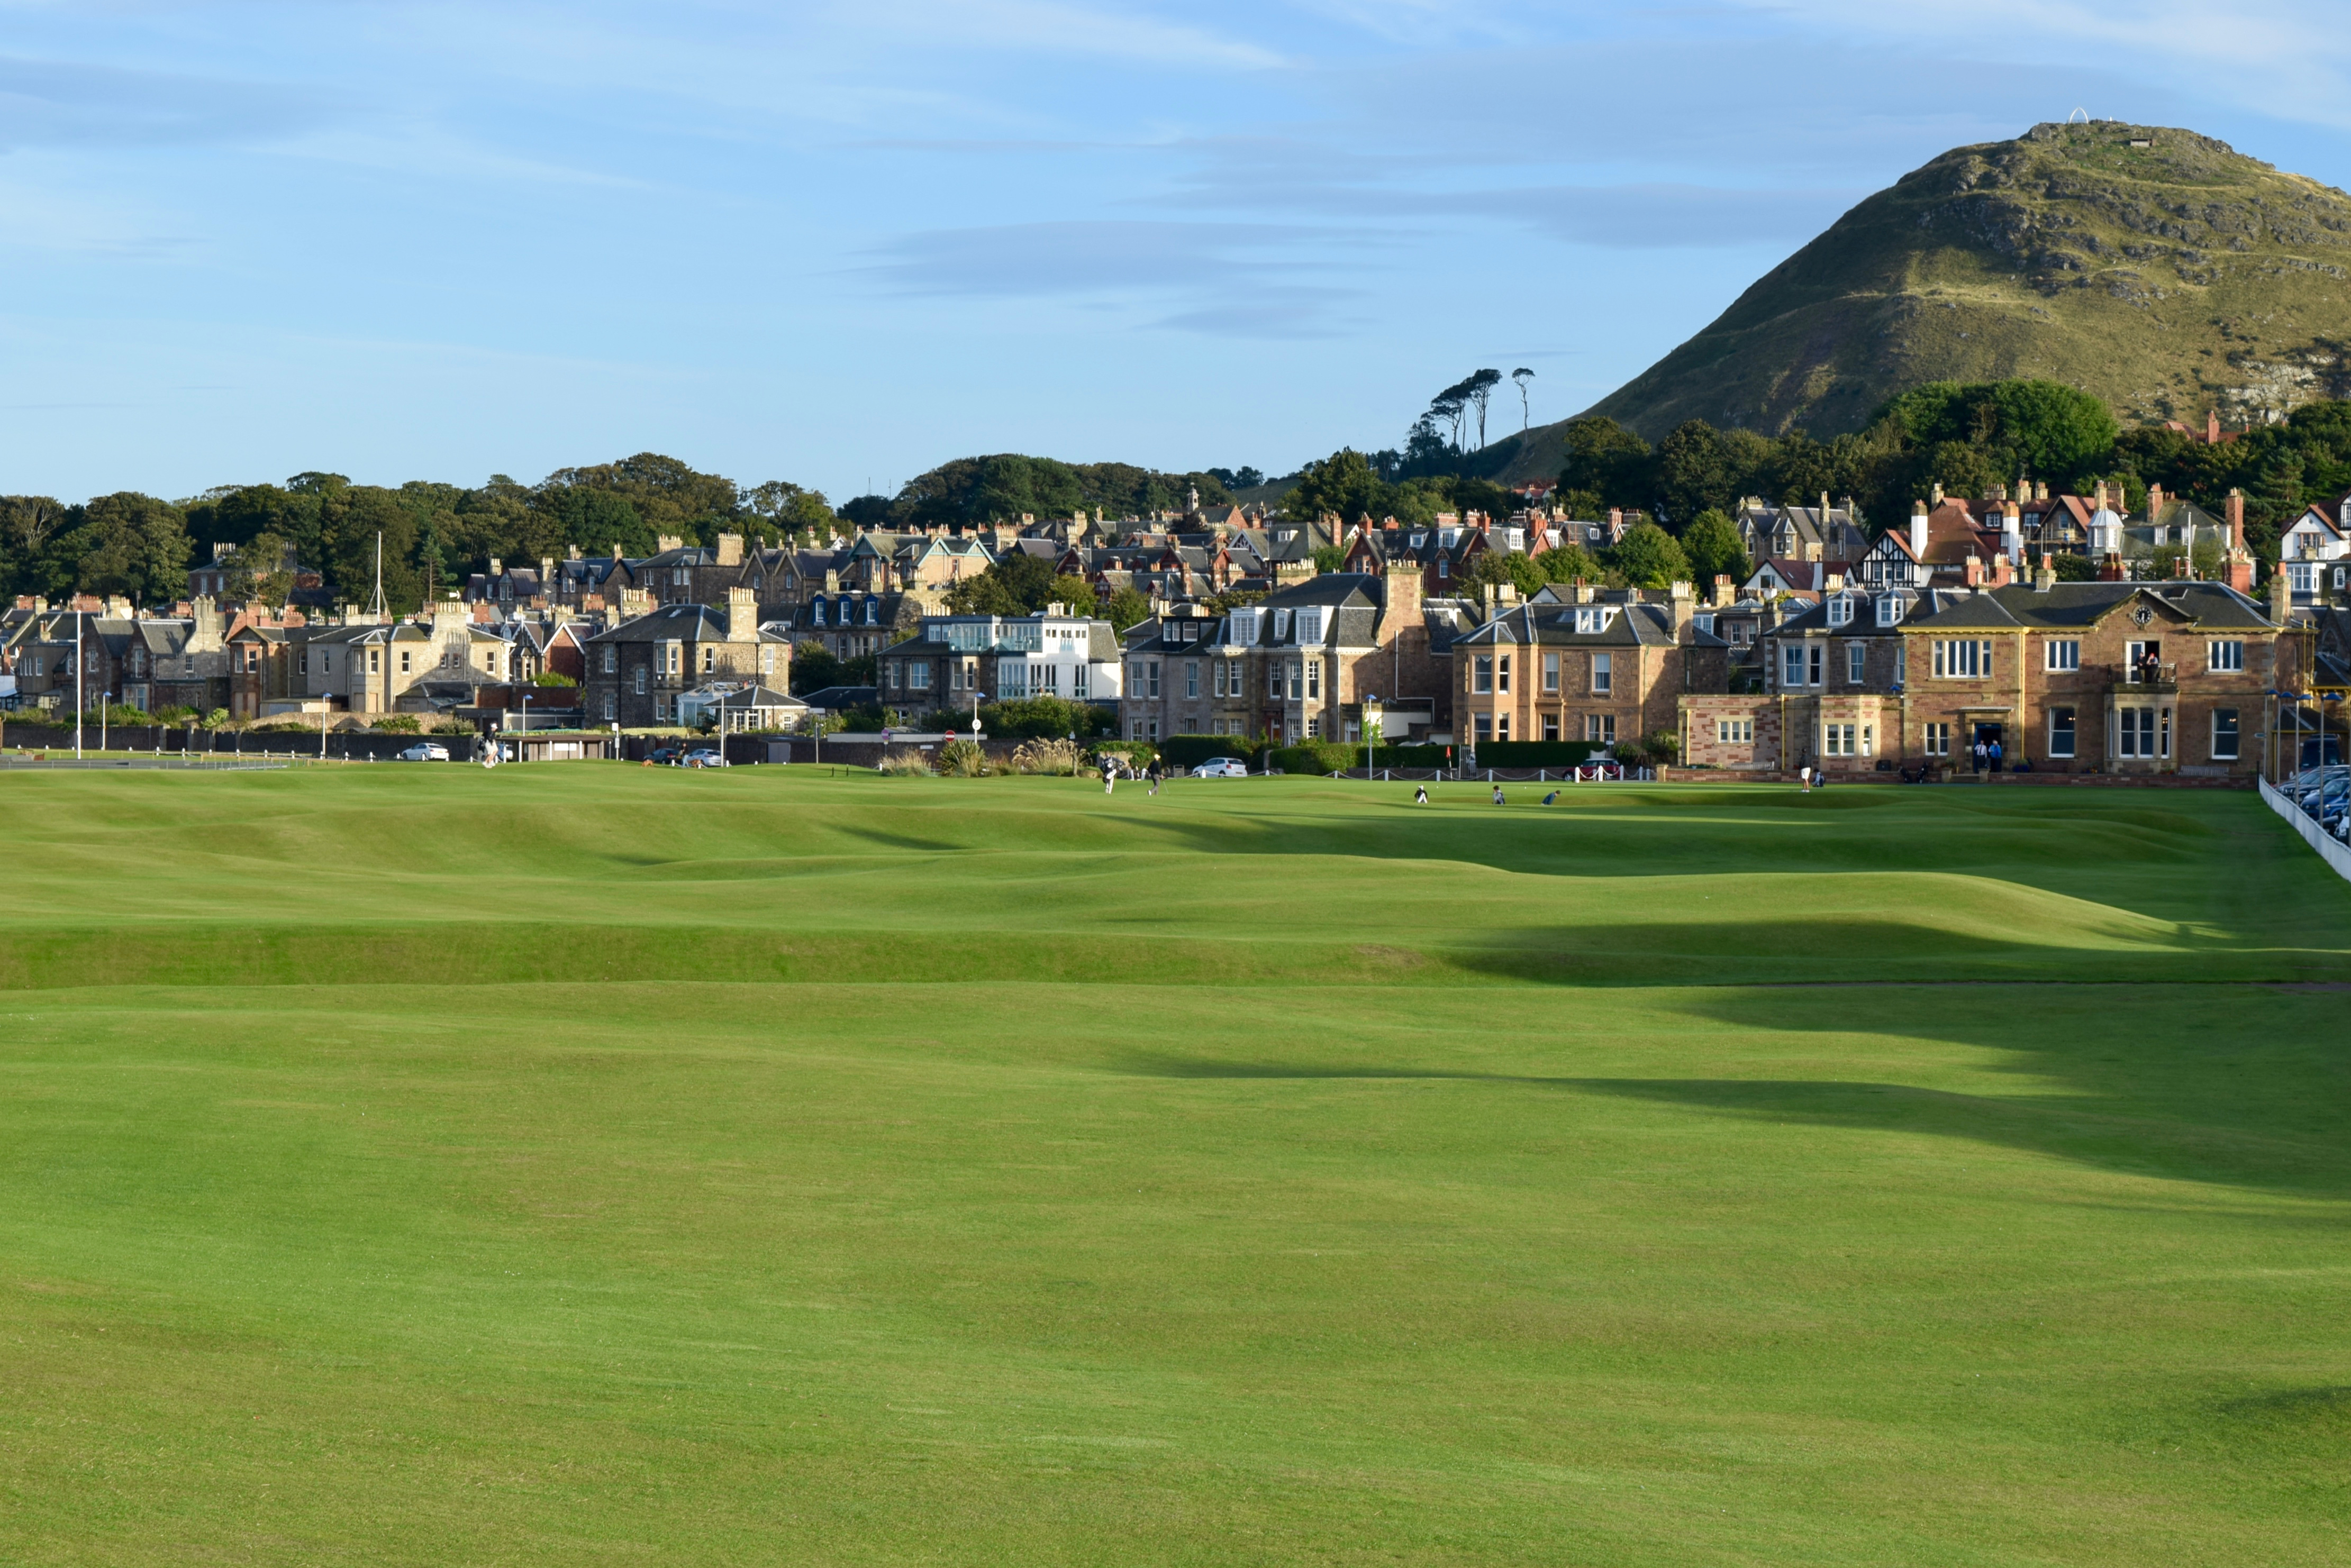 Scotland, revisted: Where all roads lead home, to golf